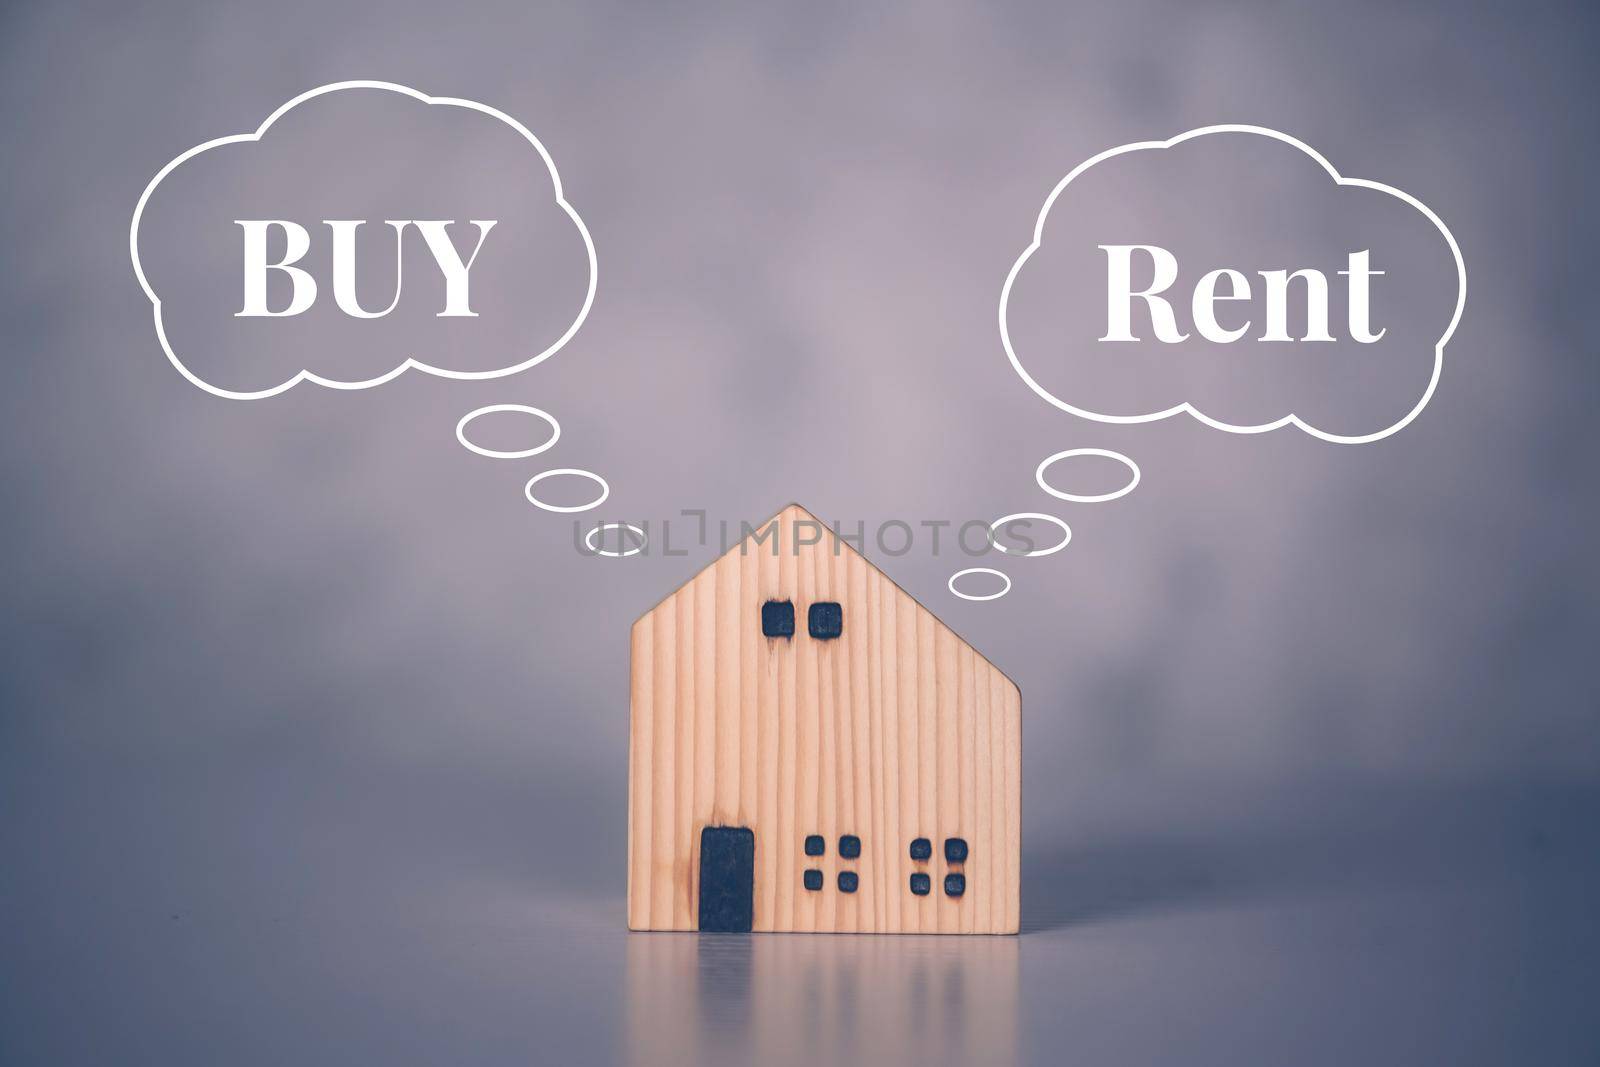 Rent or buy home with real estate for benefits, decision about planning and strategy of house and tax, property with success and saving financial, comparison and advantage, business concept.